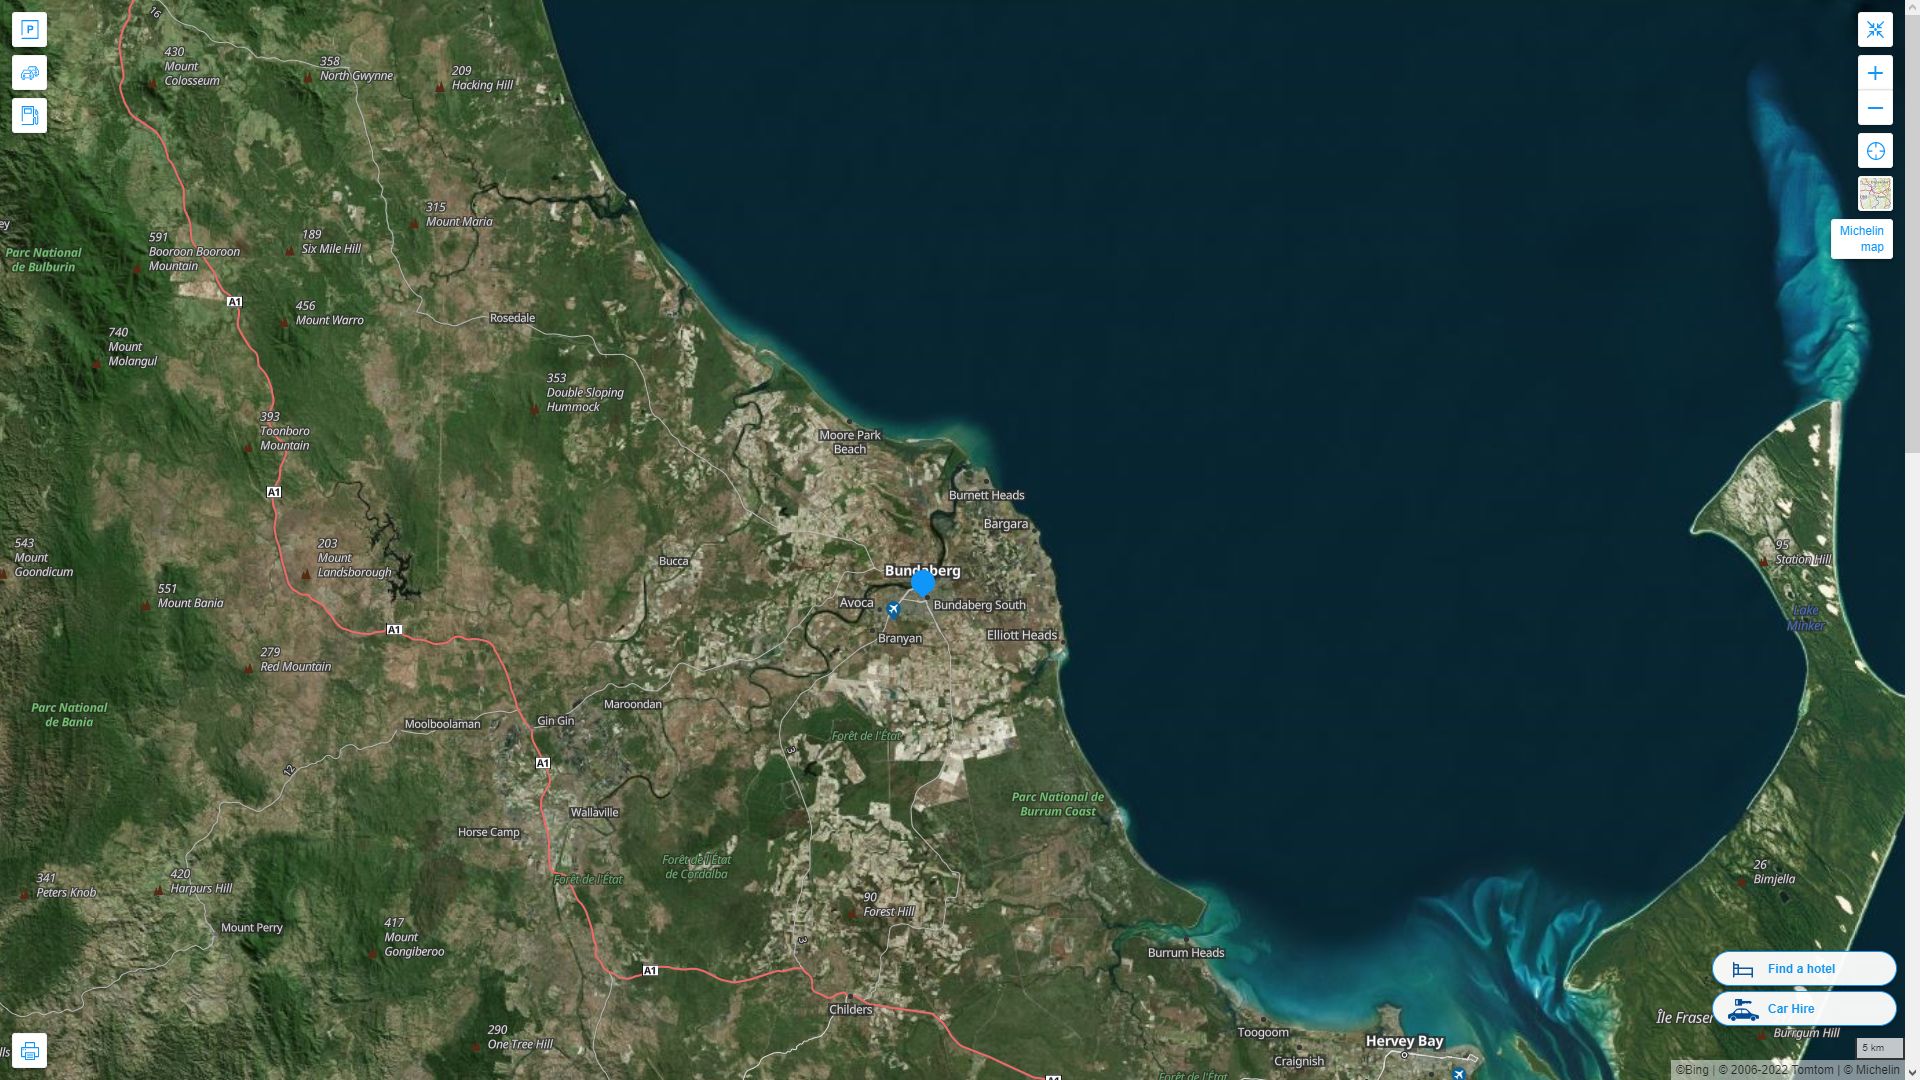 Bundaberg Highway and Road Map with Satellite View